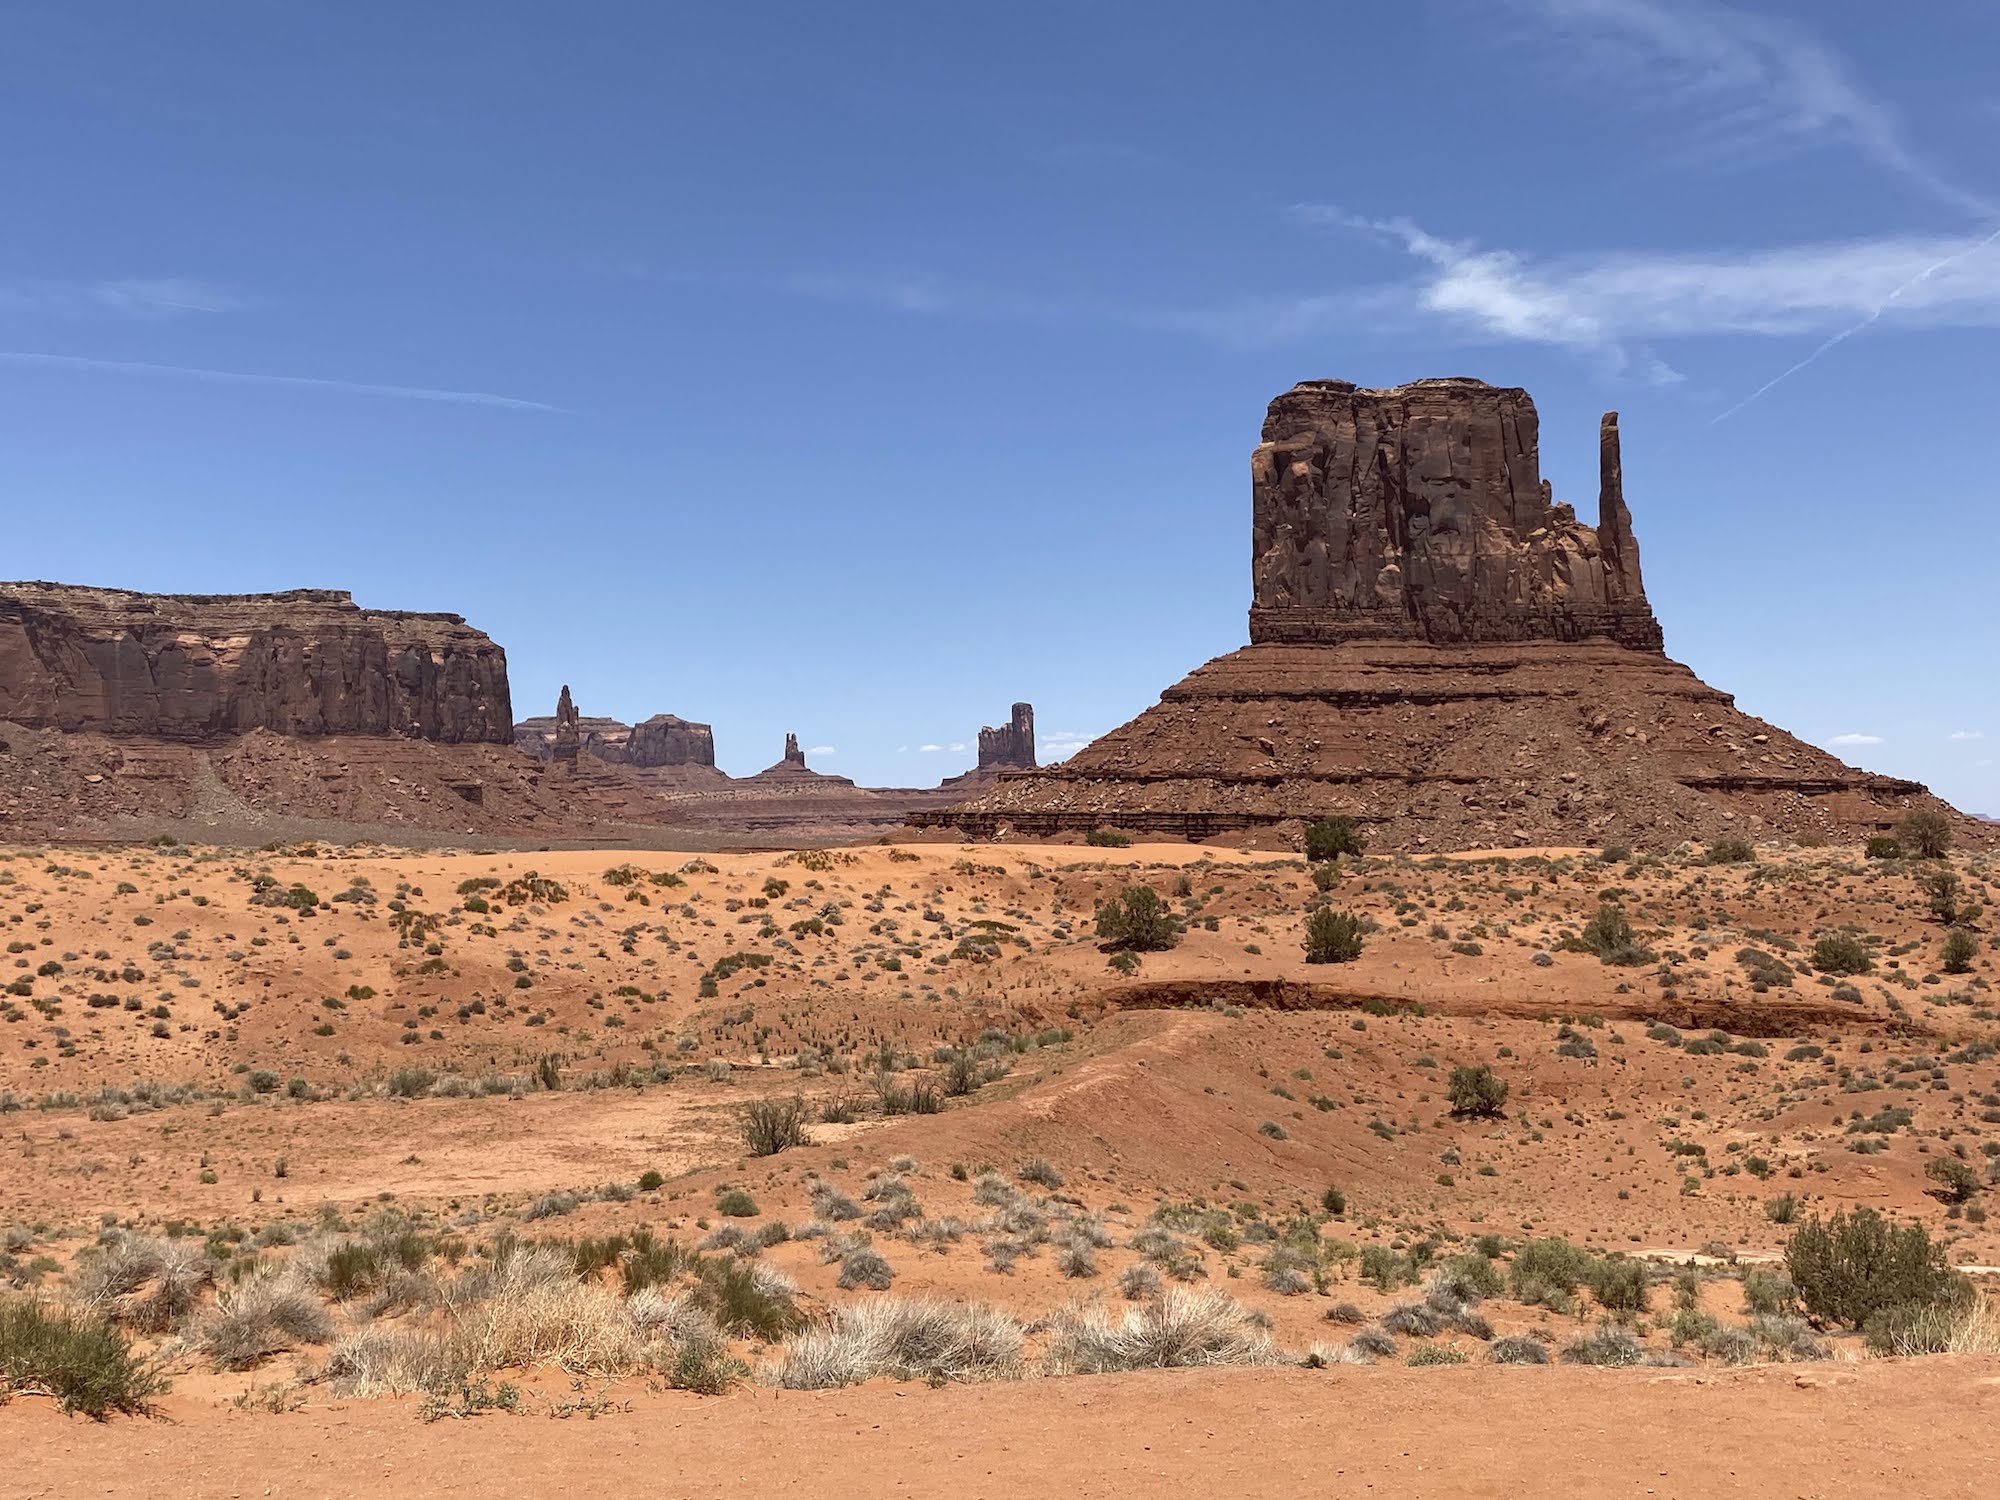 Brown monoliths of rock tower over the red sand desert